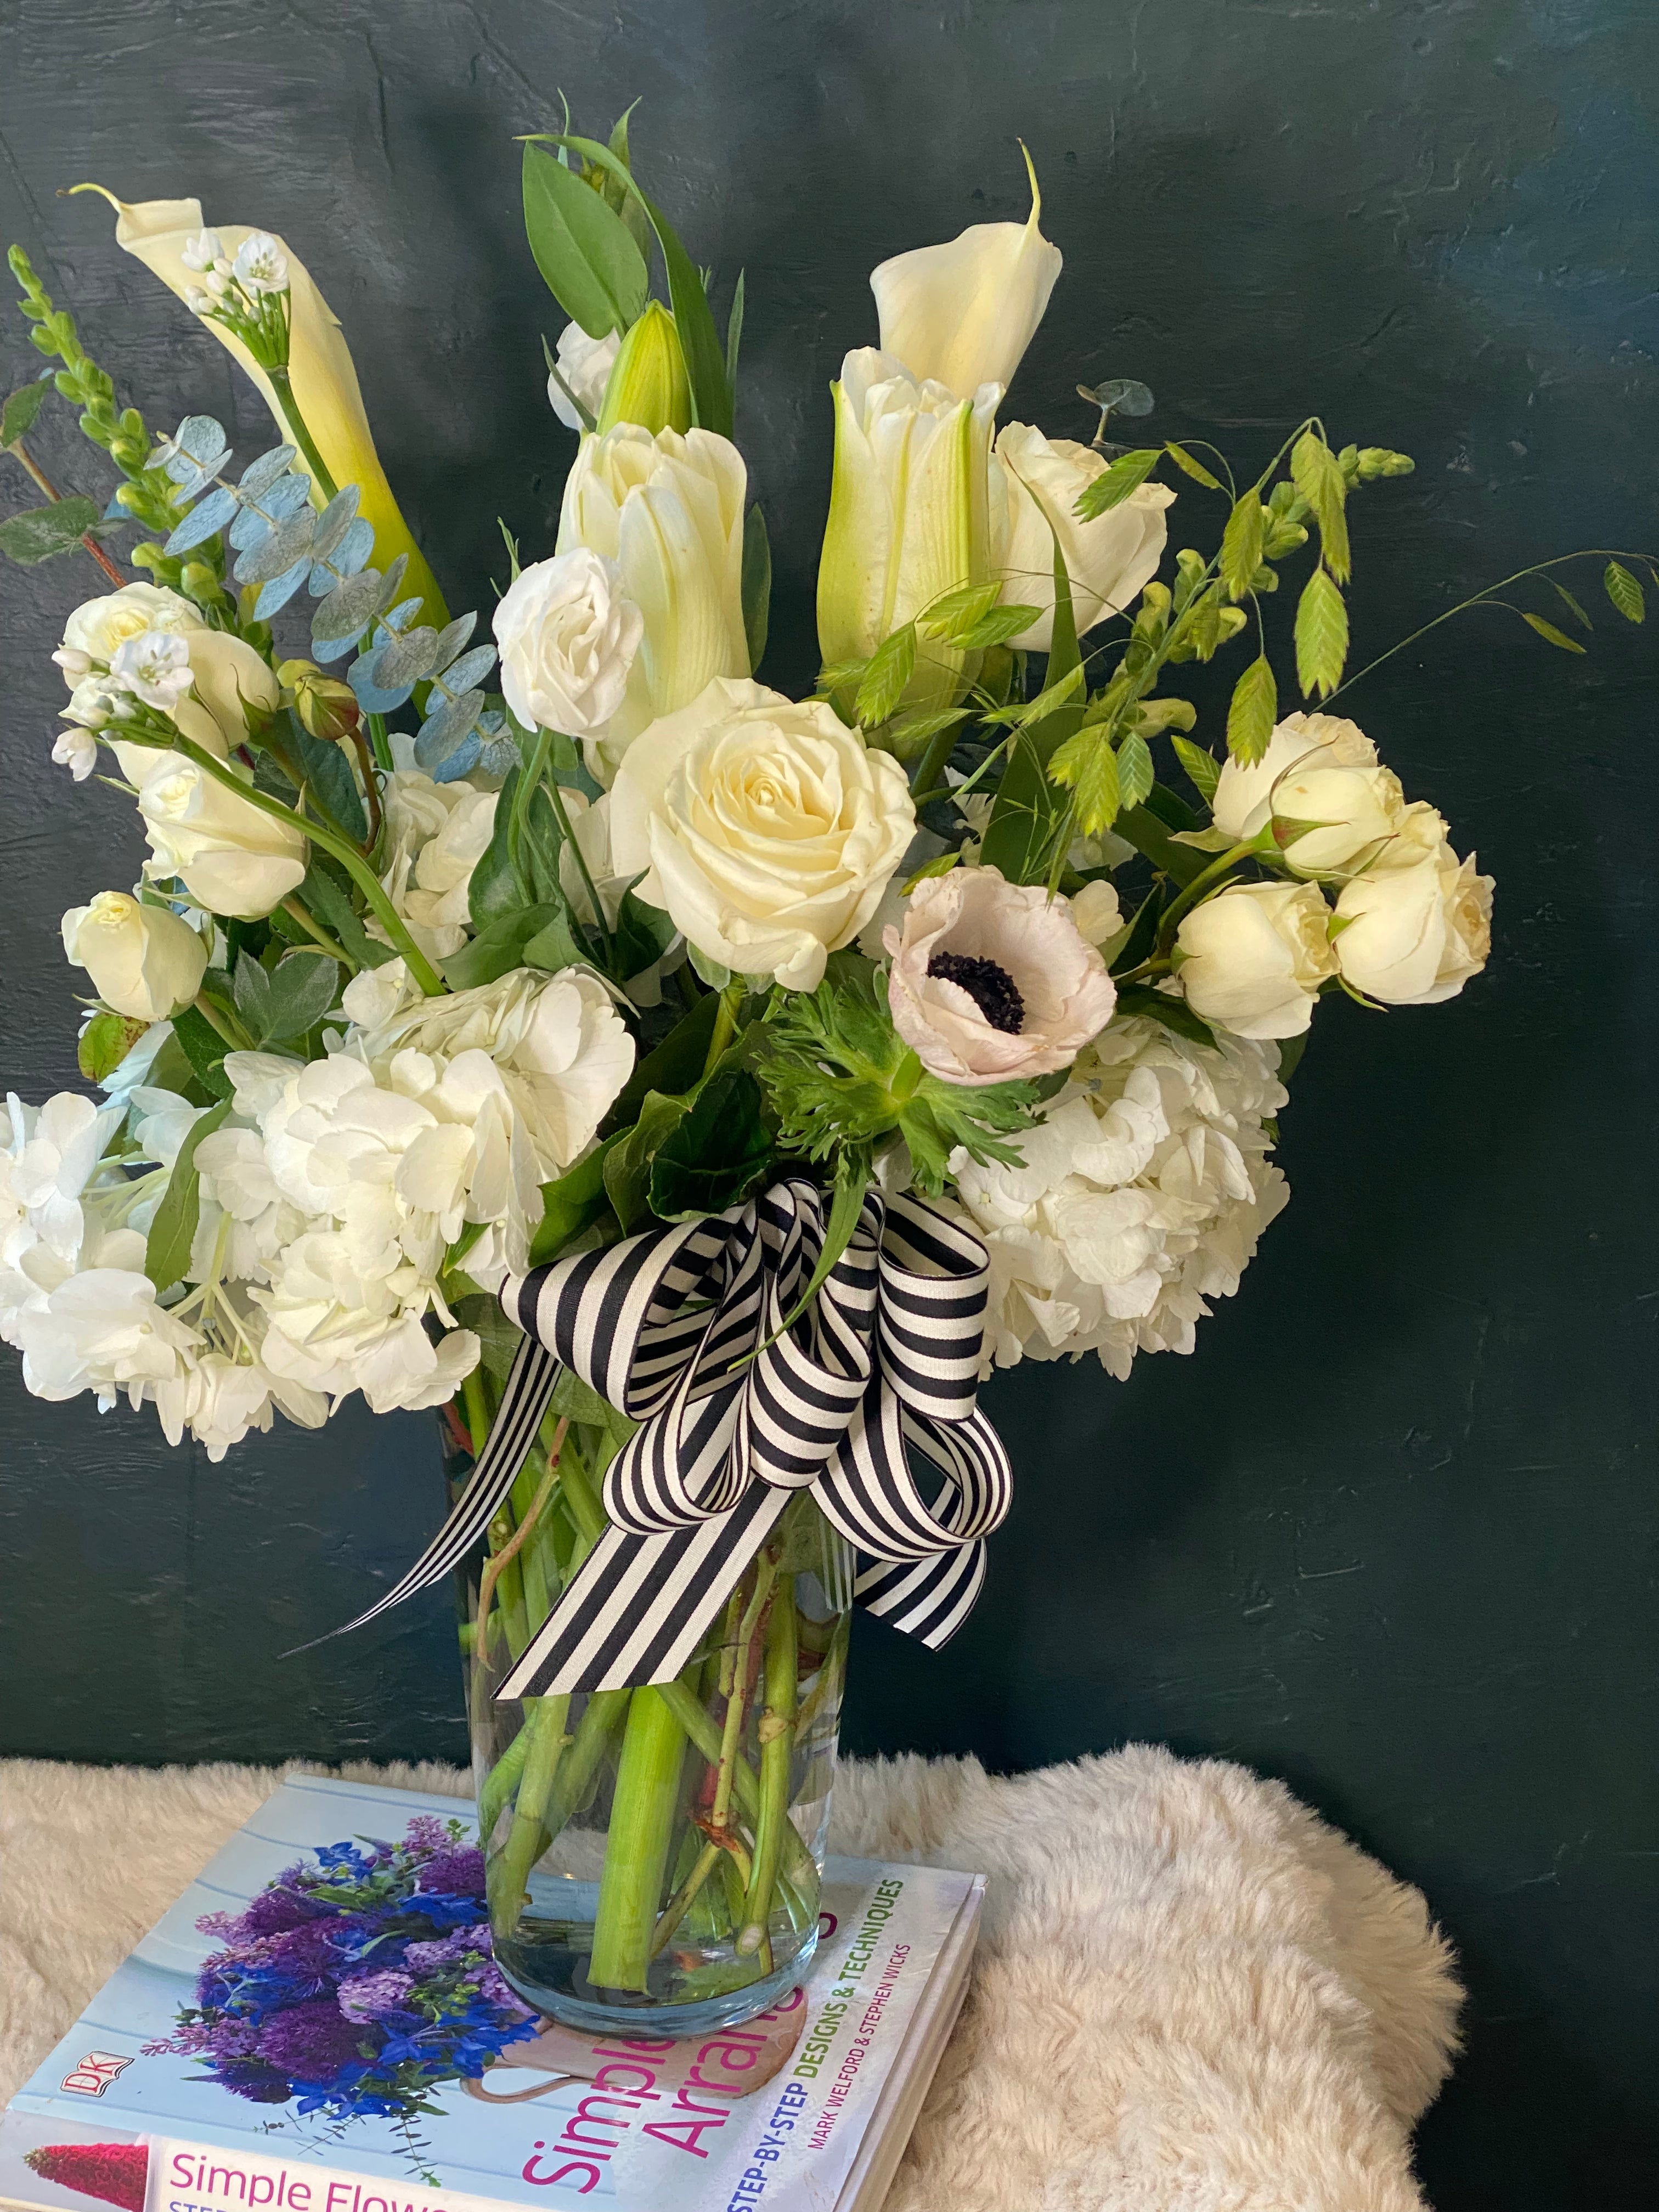 Earth Blossoms Flowers - We're offering flower deliveries again next week!  DM us to order. . . . Minimum order for delivery is $45. Varying sized  arrangements will also be available at